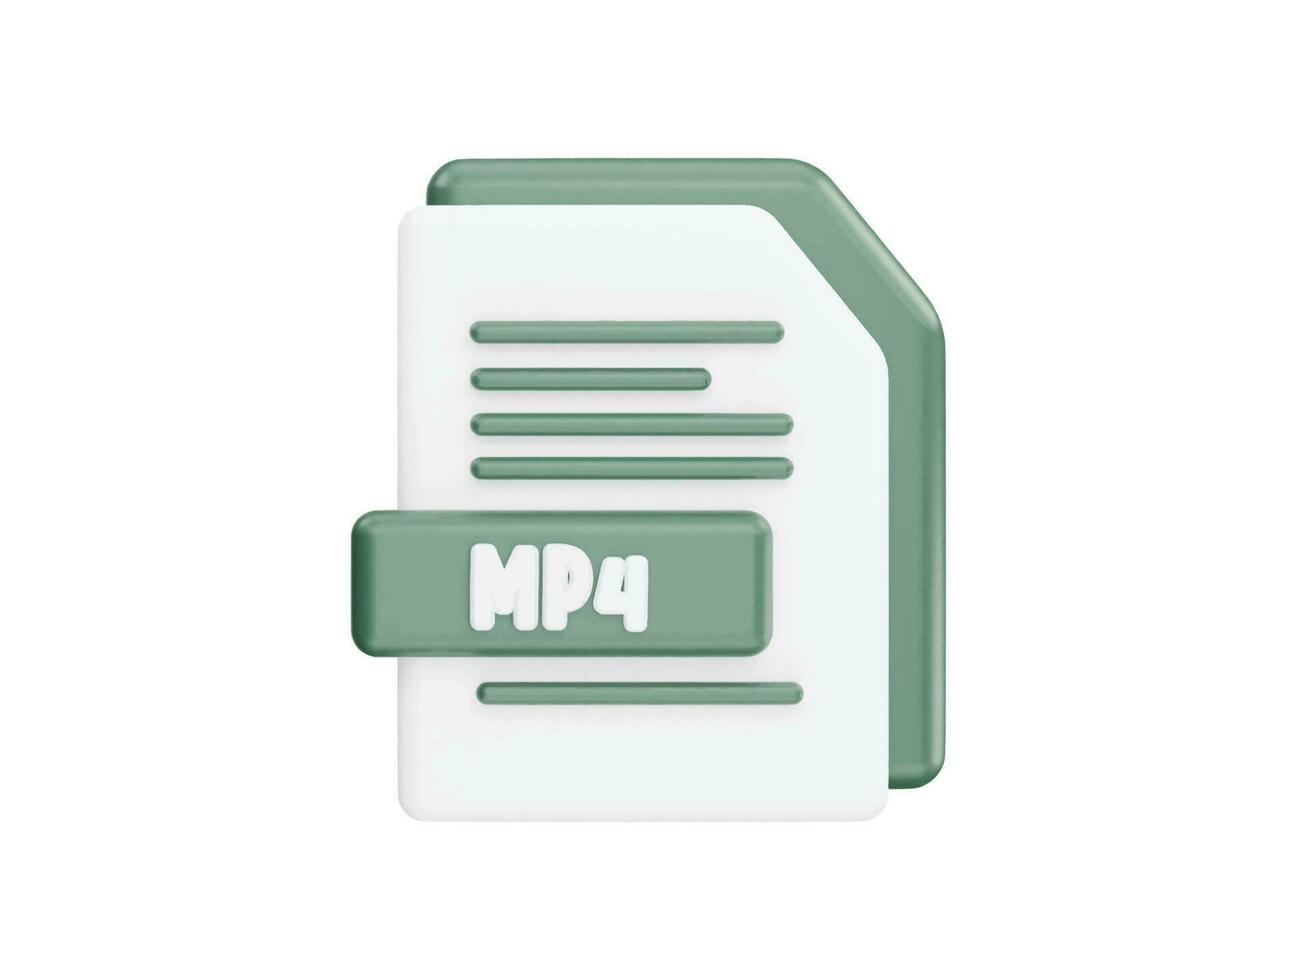 Mp4 file with 3d vector icon cartoon minimal style